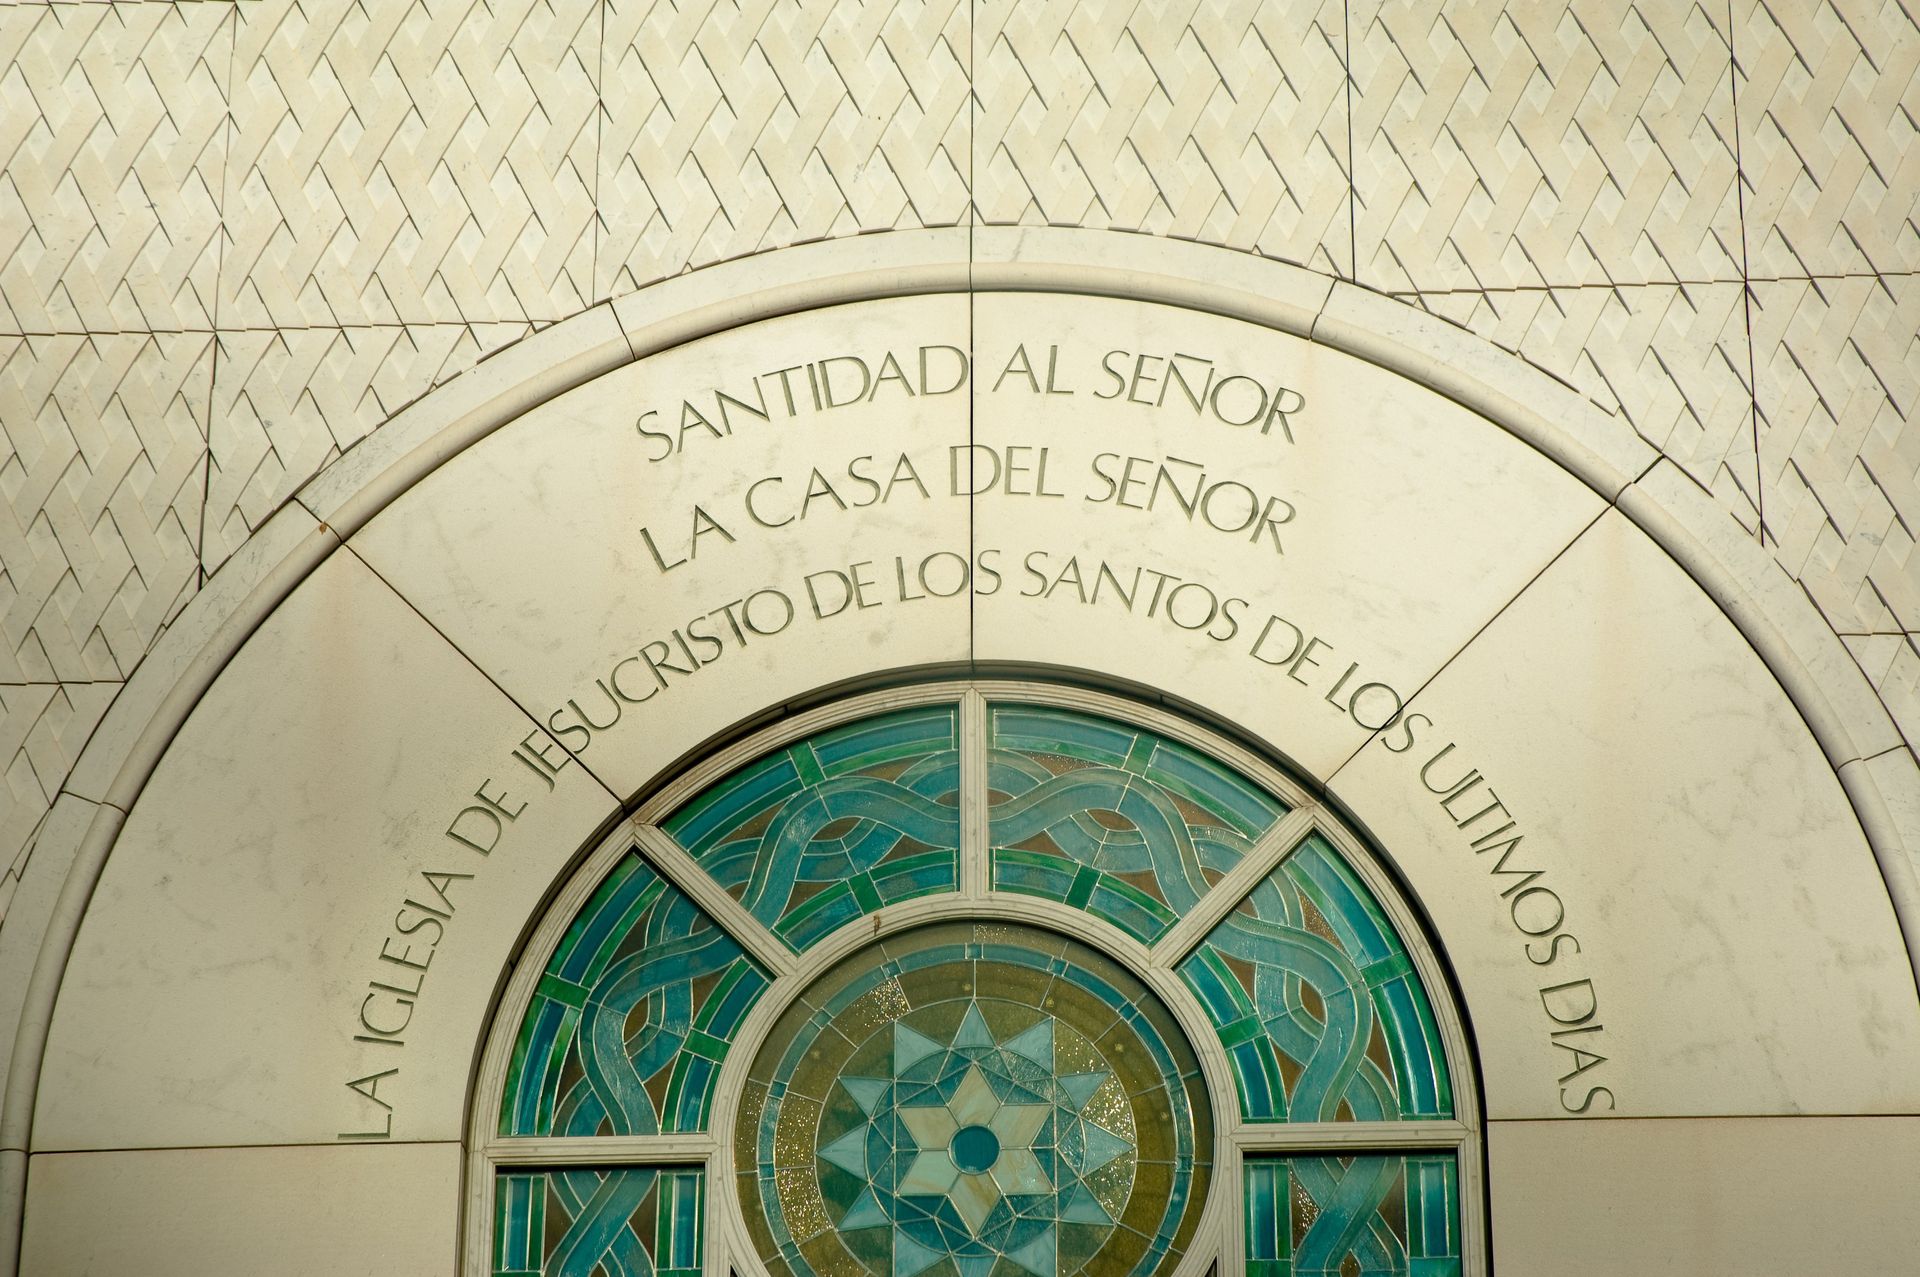 The Madrid Spain Temple inscription, “Holiness to the Lord: The House of the Lord,” including the window.